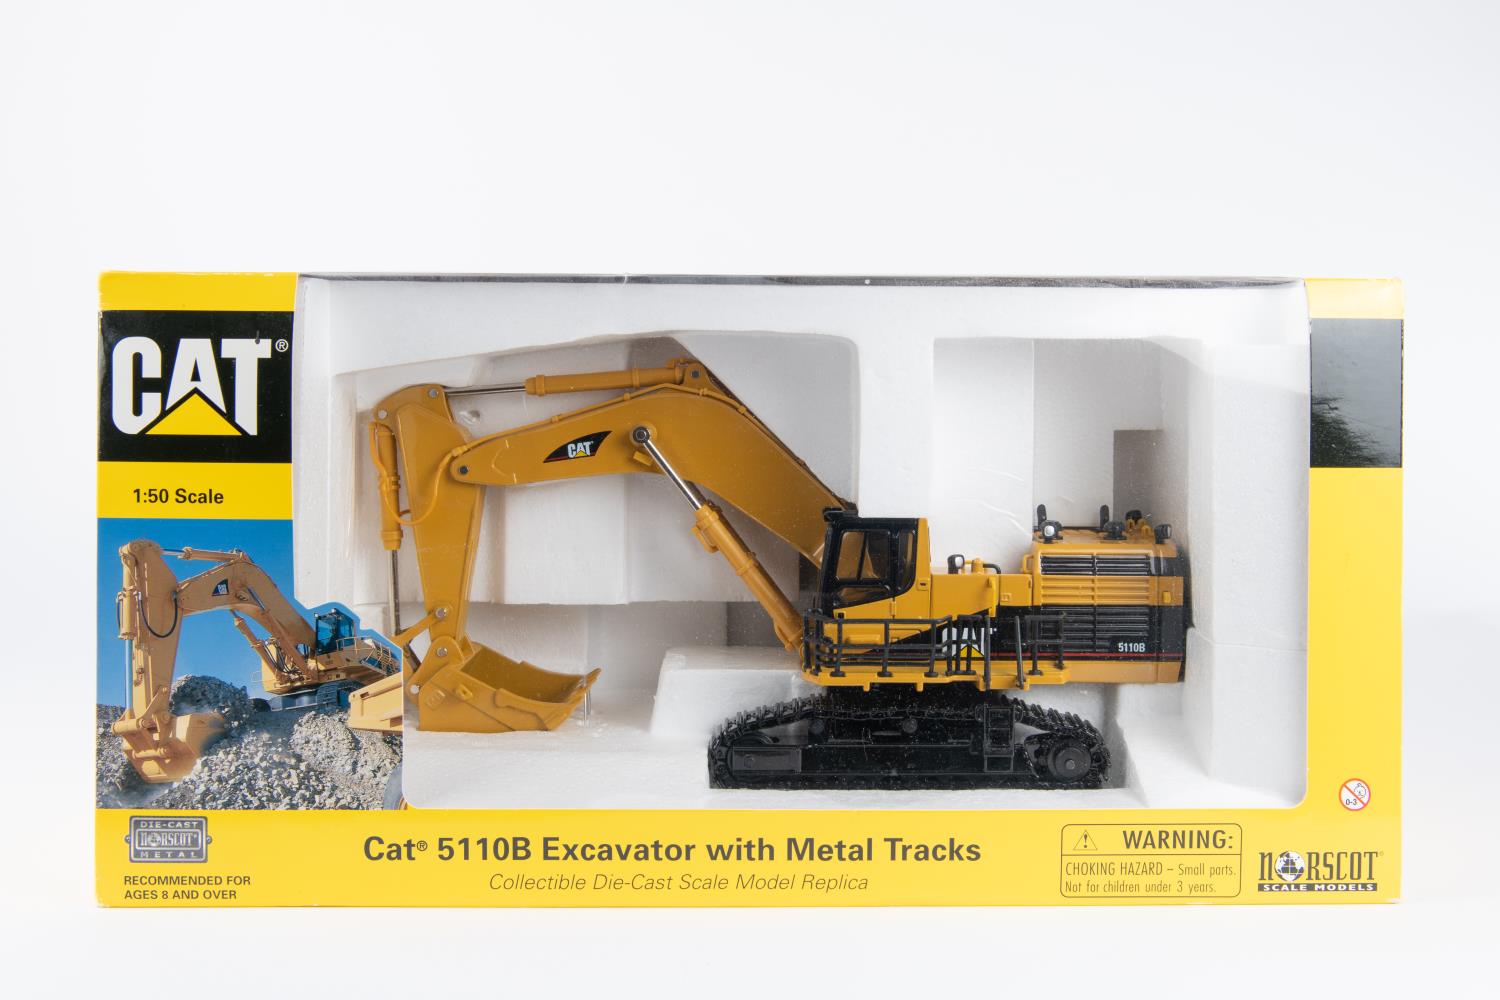 Norscot 1:50 scale Cat 5110B. Excavator with Metal Tracks. In yellow and black livery. Boxed,